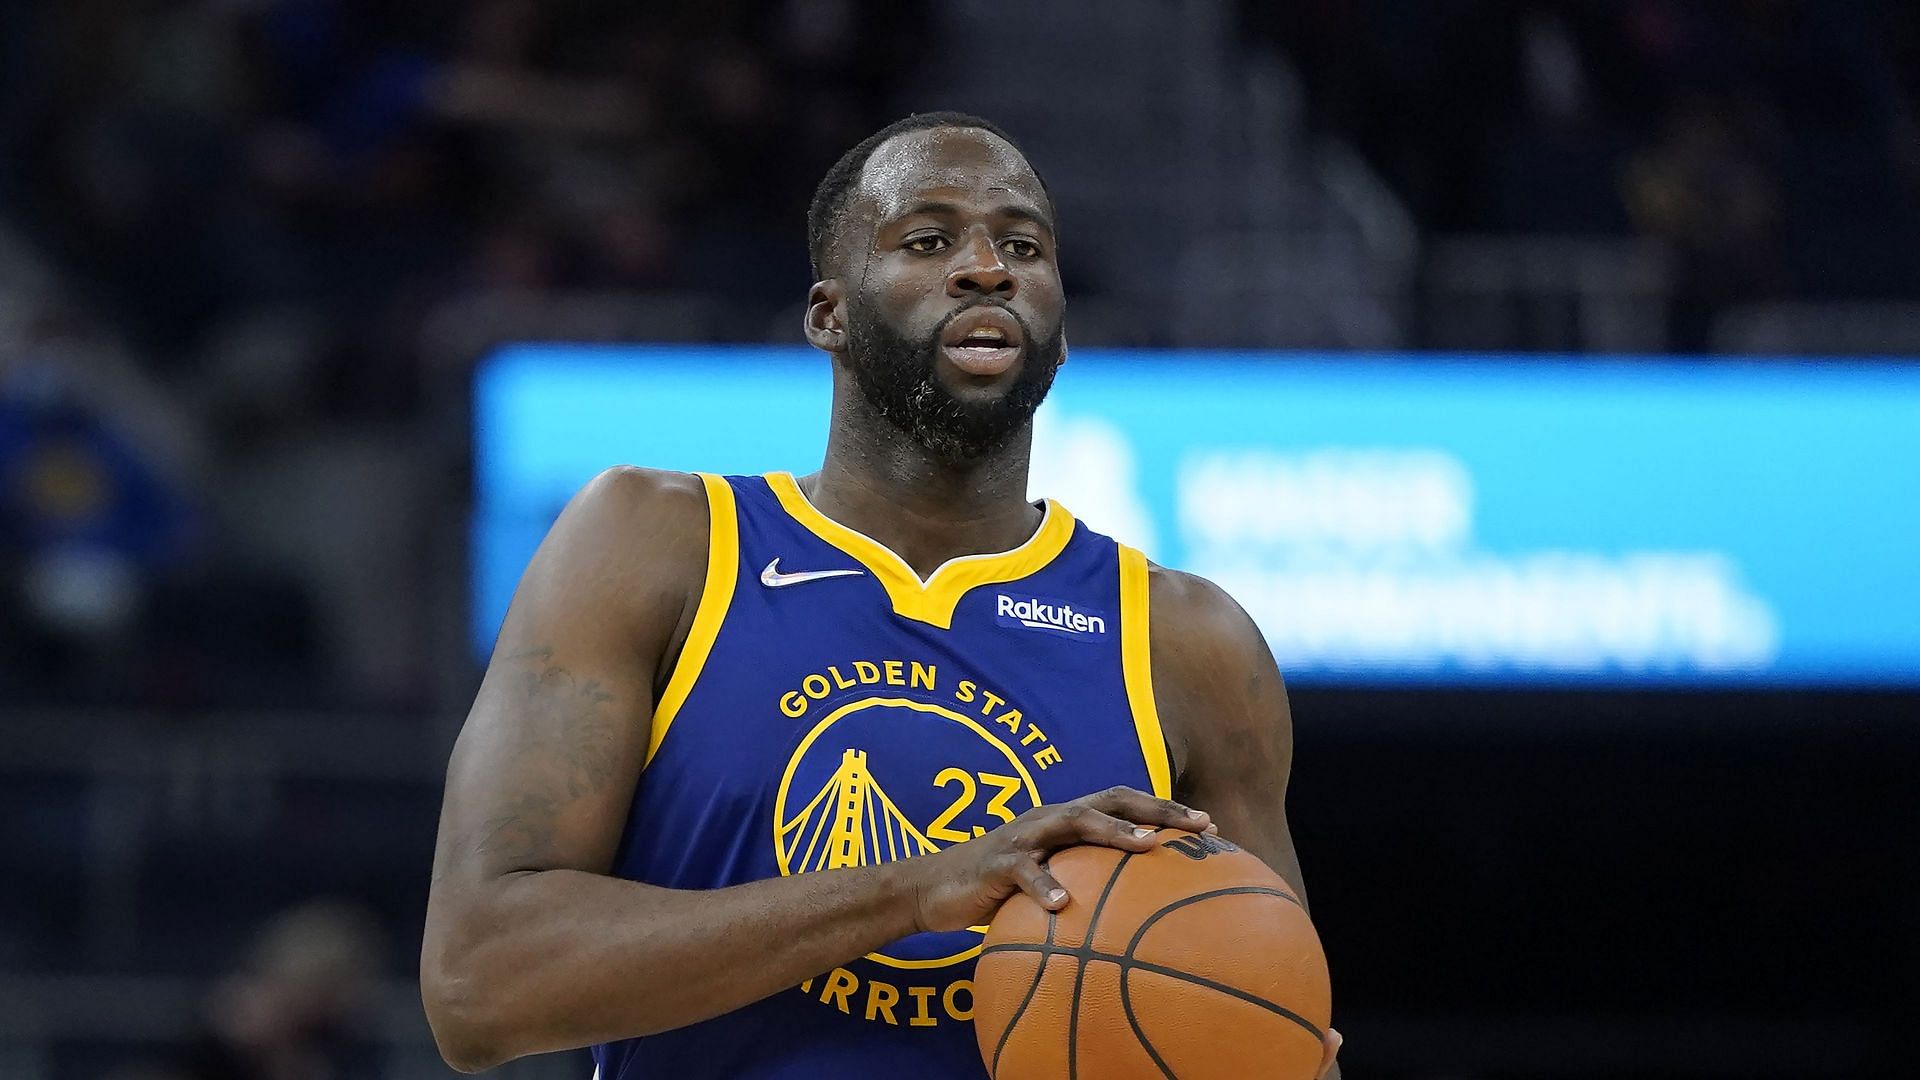 Golden State Warriors forward Draymond Green has been impressive on the defensive side of the ball